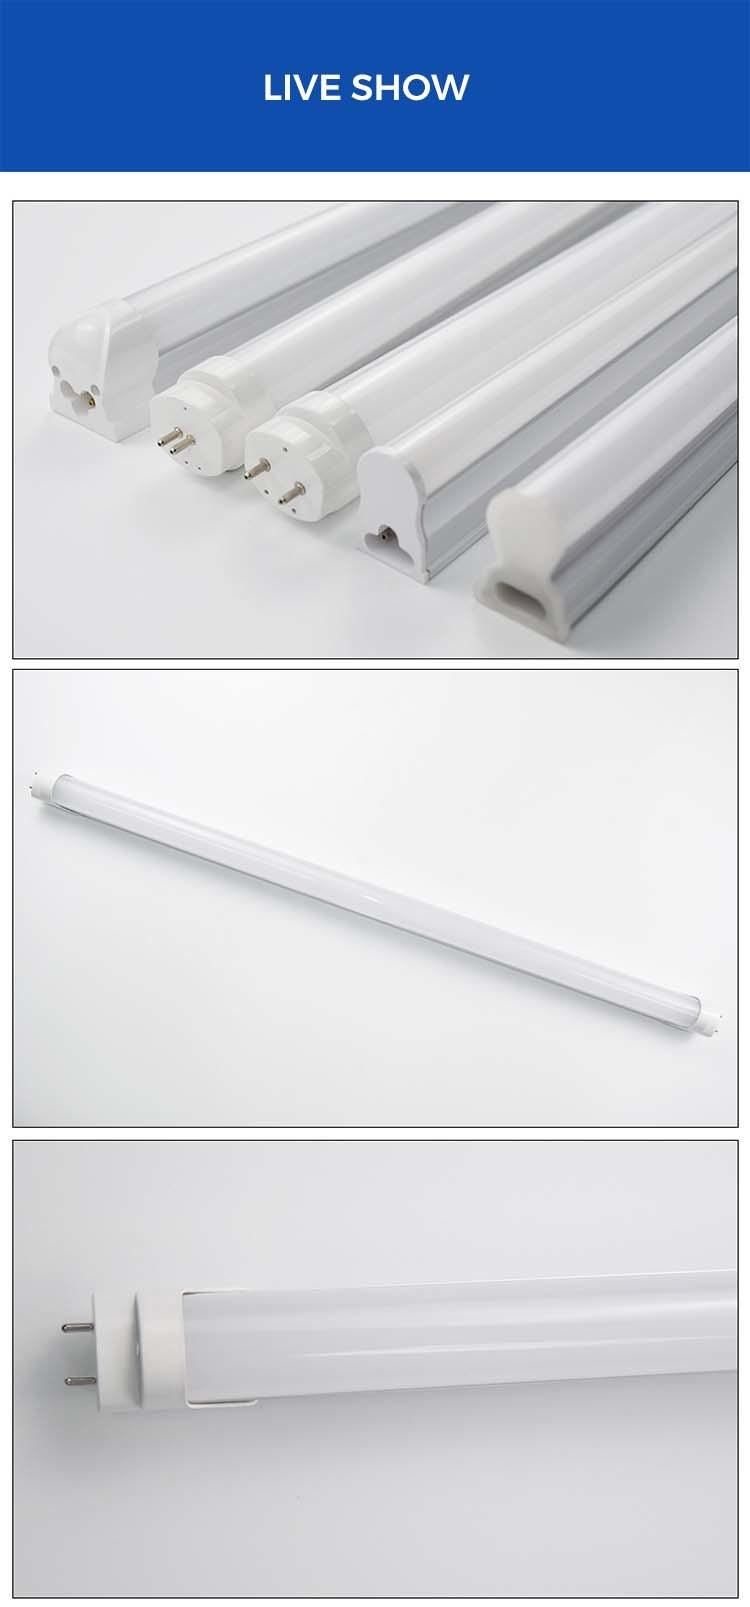 Home 24 Watts T12 Components Kinetik Digital Frosted Tube Light